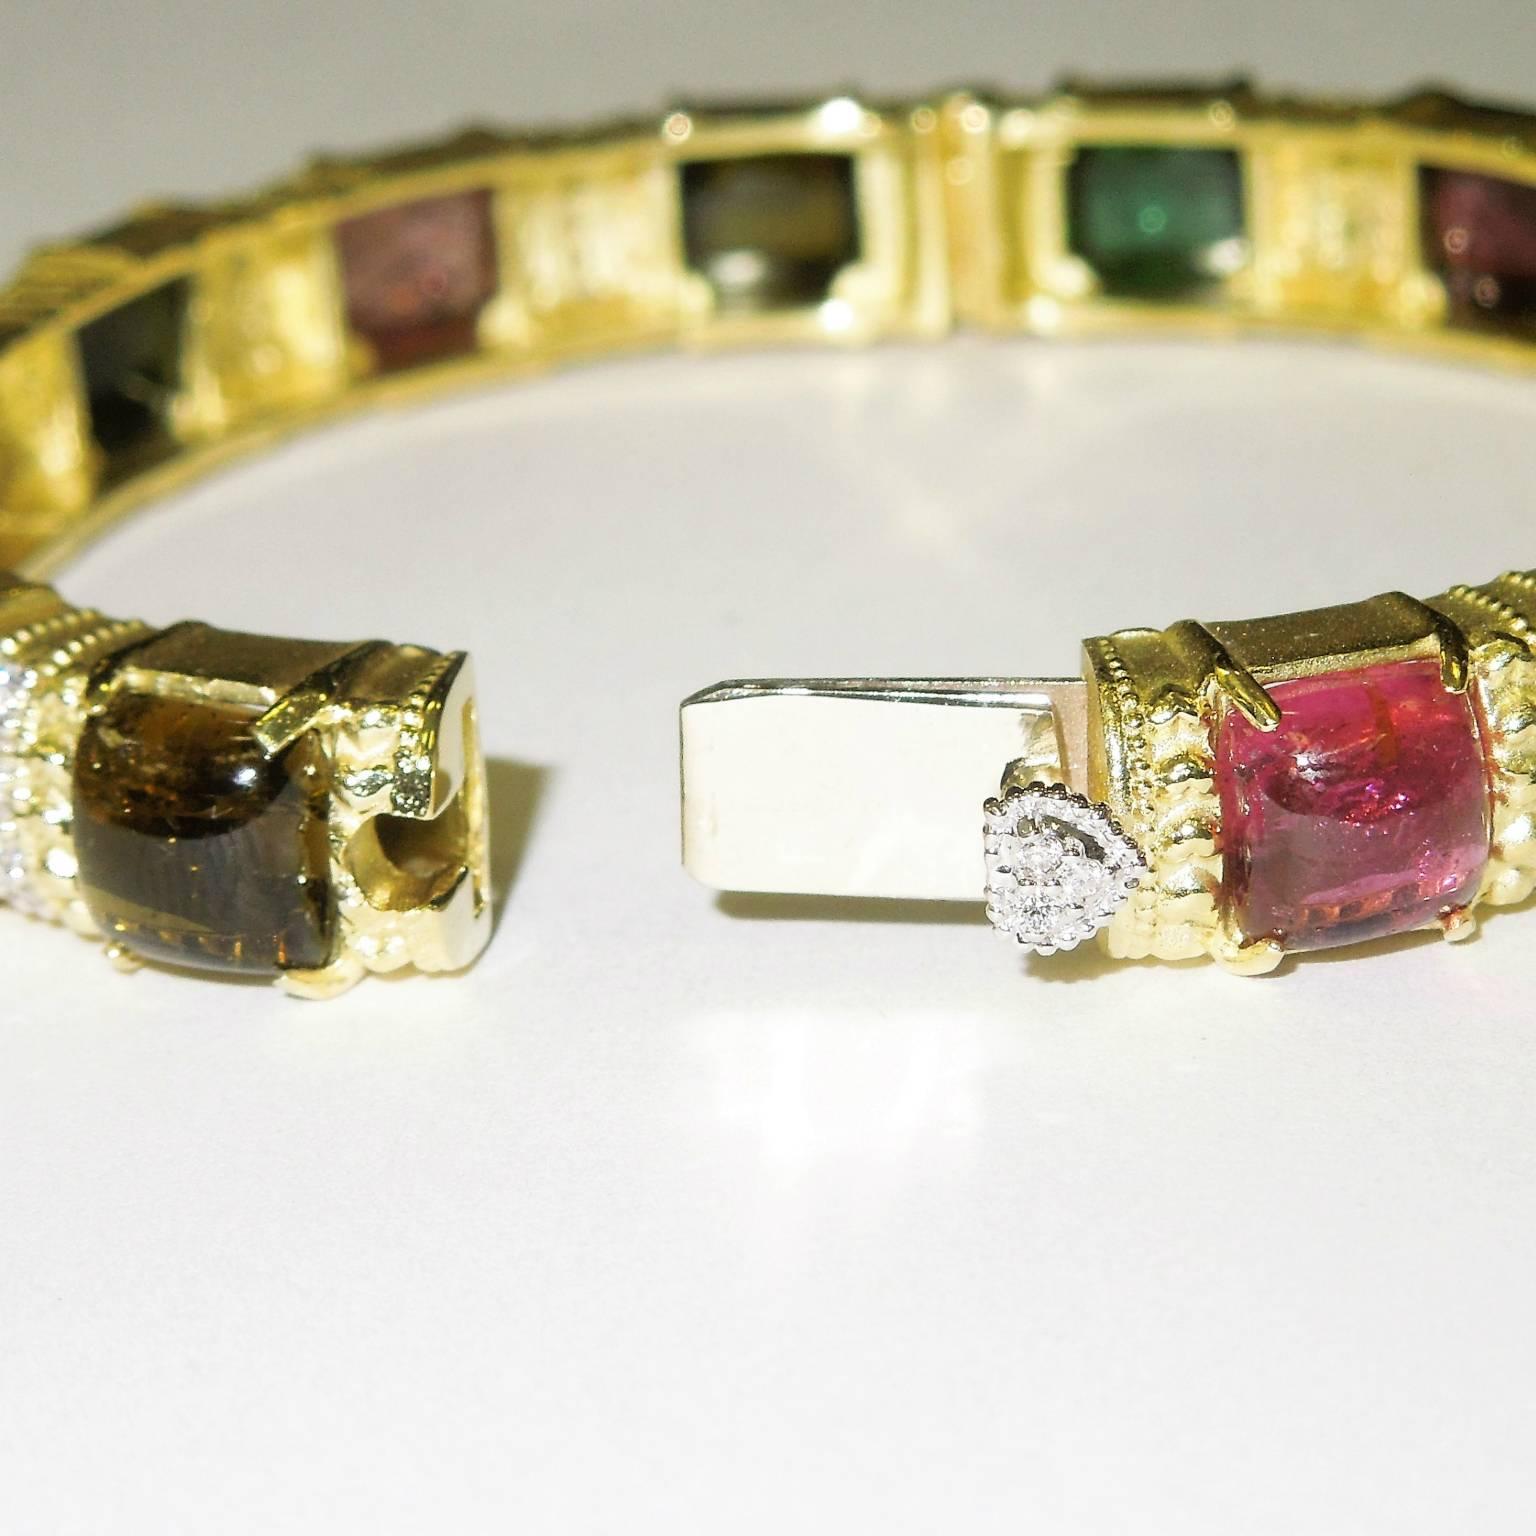 18K gold bangle bracelet with tourmalines and diamonds

Diamonds and tourmalines go all the way around

23.00ct. total multi-color tourmalines, 7mm each.

0.63ct. G color, VS Clarity diamonds

0.30 inches in width

Signed STAMBOLIAN with our